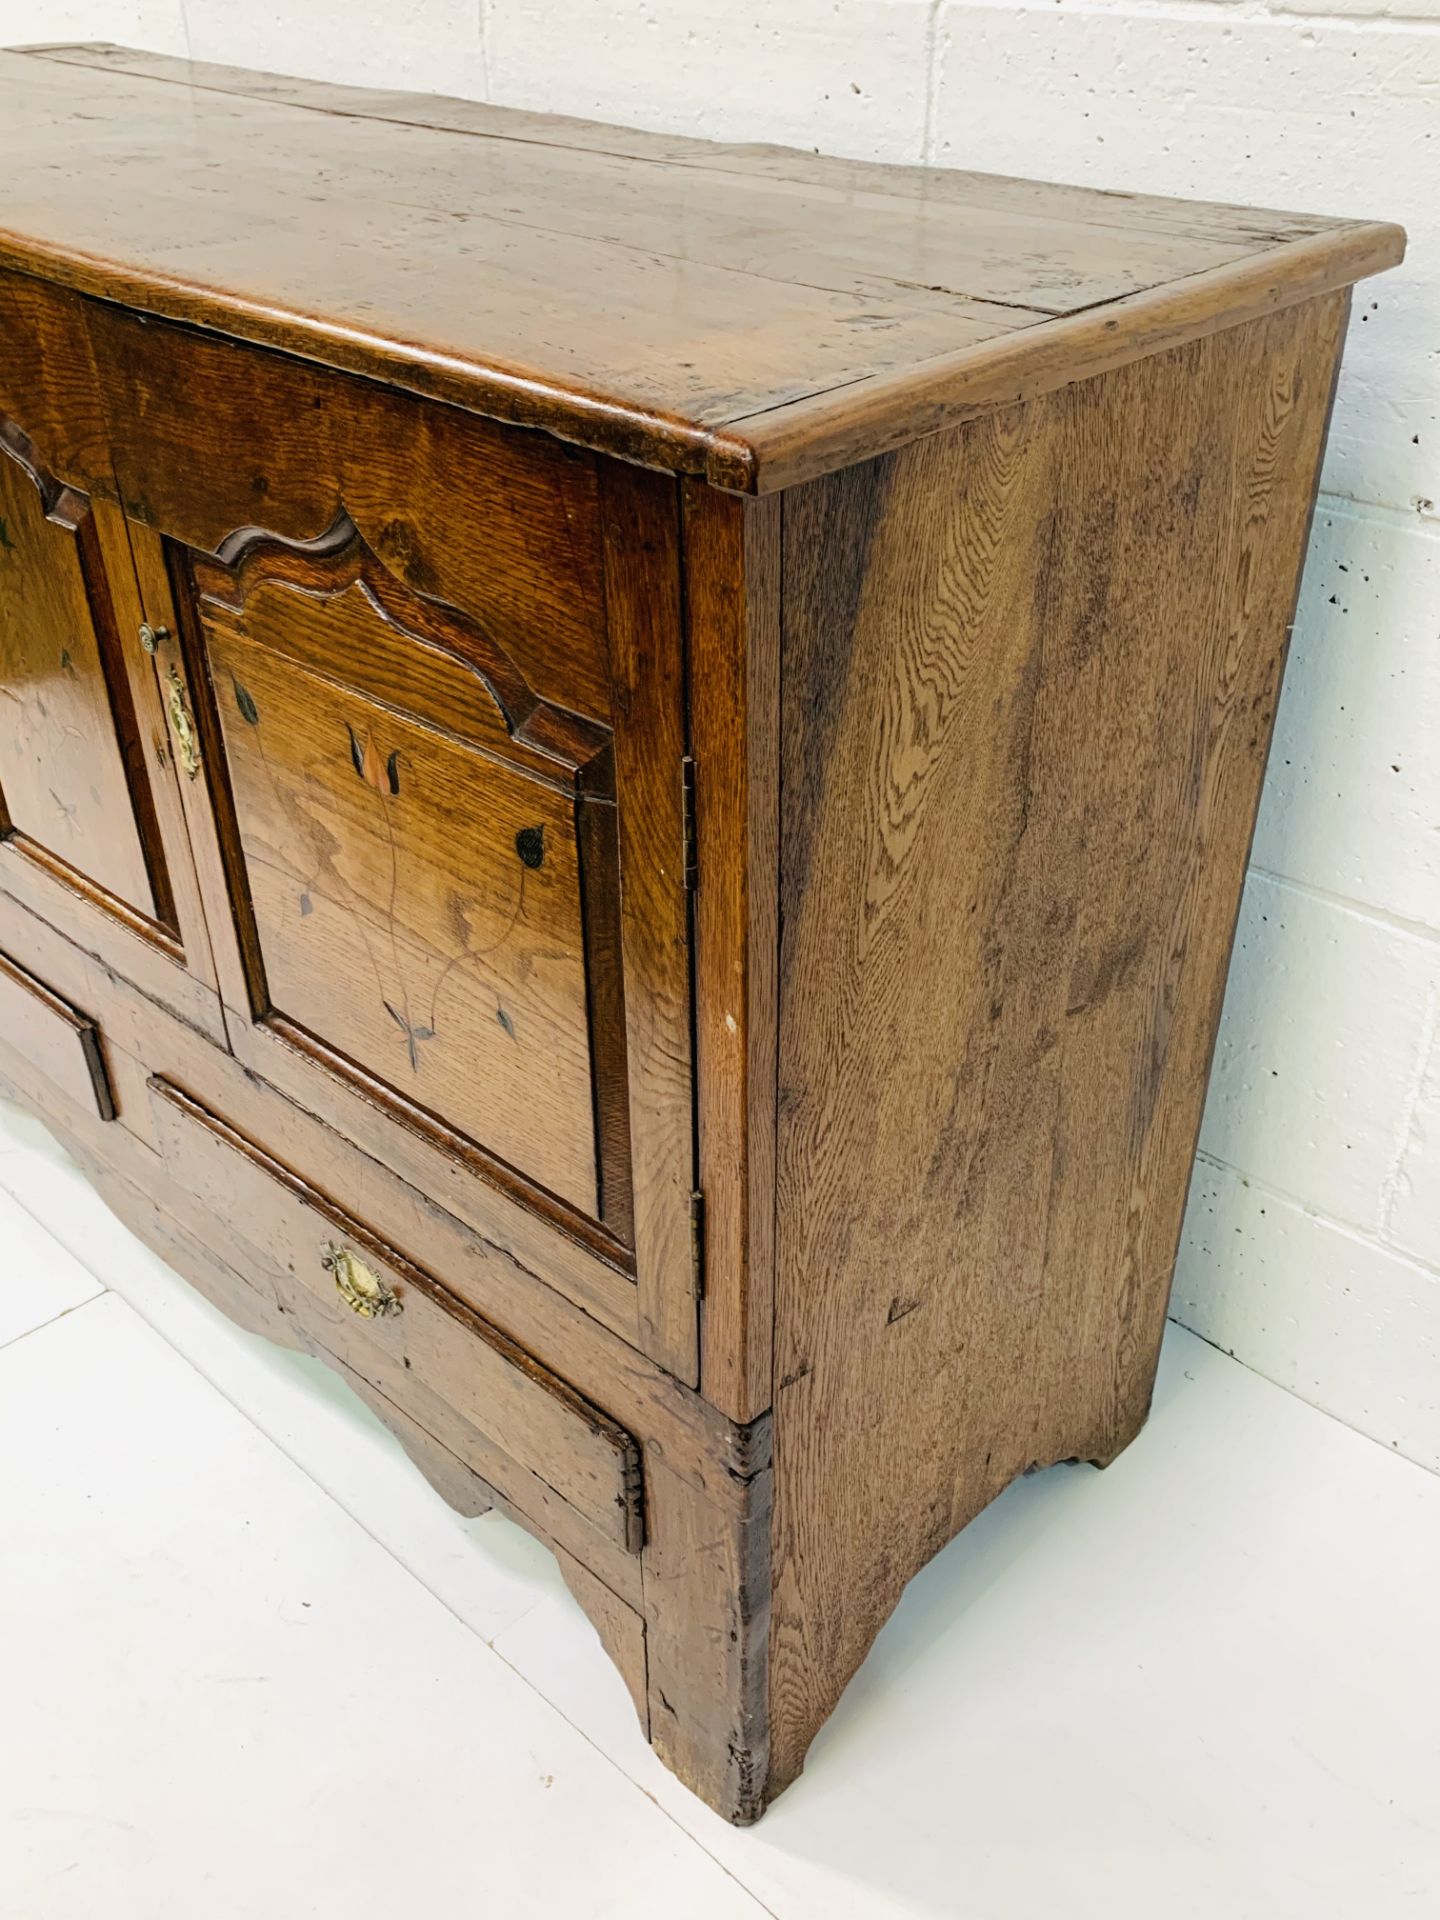 Oak sideboard with decorative inlaid door fronts and panel - Image 7 of 8